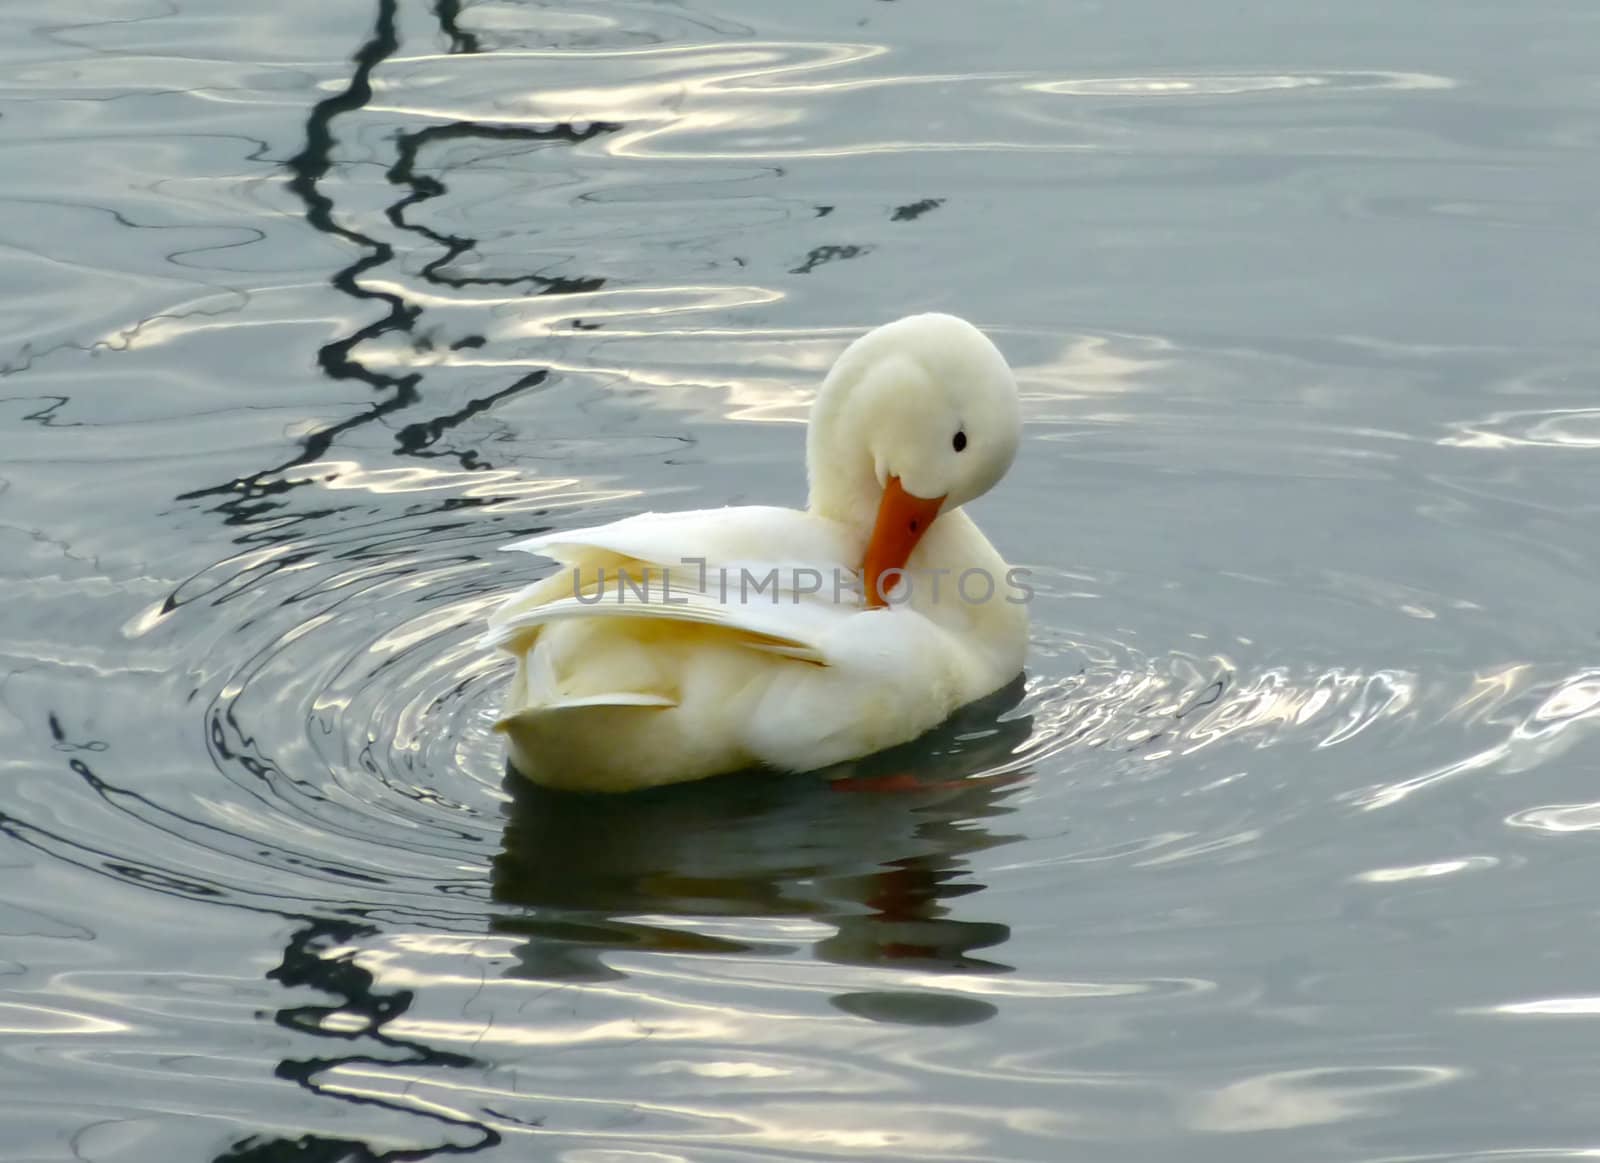 Scratching white duck on water with waves and reflections